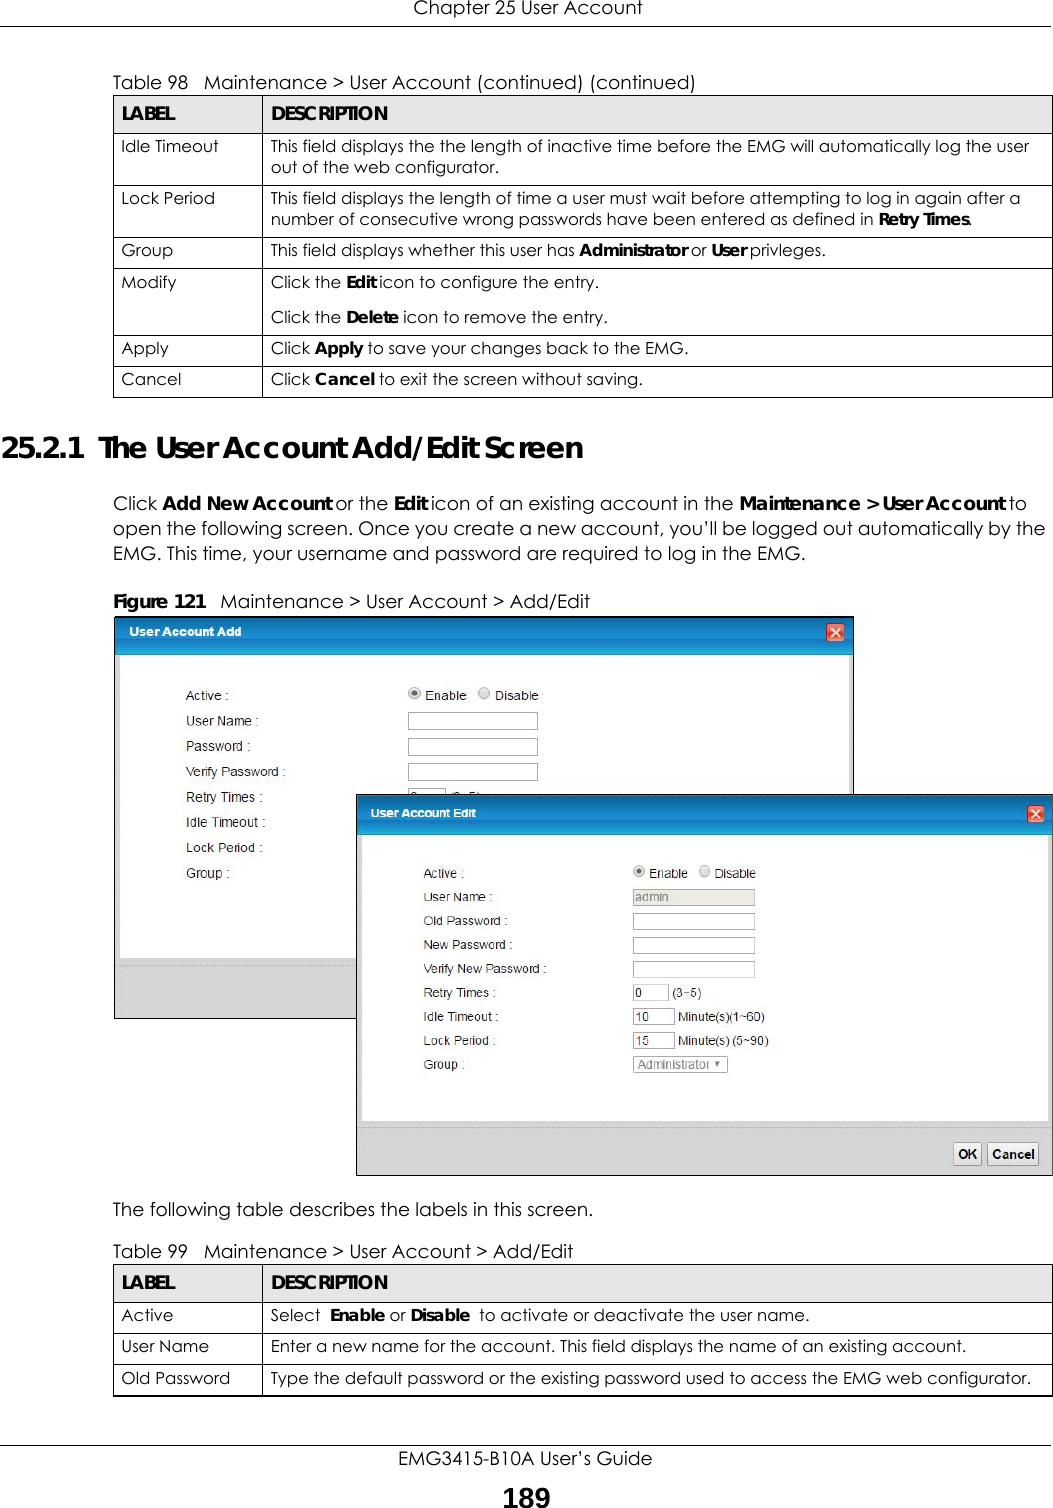  Chapter 25 User AccountEMG3415-B10A User’s Guide18925.2.1  The User Account Add/Edit ScreenClick Add New Account or the Edit icon of an existing account in the Maintenance &gt; User Account to open the following screen. Once you create a new account, you’ll be logged out automatically by the EMG. This time, your username and password are required to log in the EMG.Figure 121   Maintenance &gt; User Account &gt; Add/EditThe following table describes the labels in this screen. Idle Timeout This field displays the the length of inactive time before the EMG will automatically log the user out of the web configurator.Lock Period This field displays the length of time a user must wait before attempting to log in again after a number of consecutive wrong passwords have been entered as defined in Retry Times.Group This field displays whether this user has Administrator or User privleges.Modify Click the Edit icon to configure the entry.Click the Delete icon to remove the entry.Apply Click Apply to save your changes back to the EMG.Cancel Click Cancel to exit the screen without saving.Table 98   Maintenance &gt; User Account (continued) (continued)LABEL DESCRIPTIONTable 99   Maintenance &gt; User Account &gt; Add/EditLABEL DESCRIPTIONActive Select  Enable or Disable  to activate or deactivate the user name.User Name Enter a new name for the account. This field displays the name of an existing account. Old Password Type the default password or the existing password used to access the EMG web configurator.